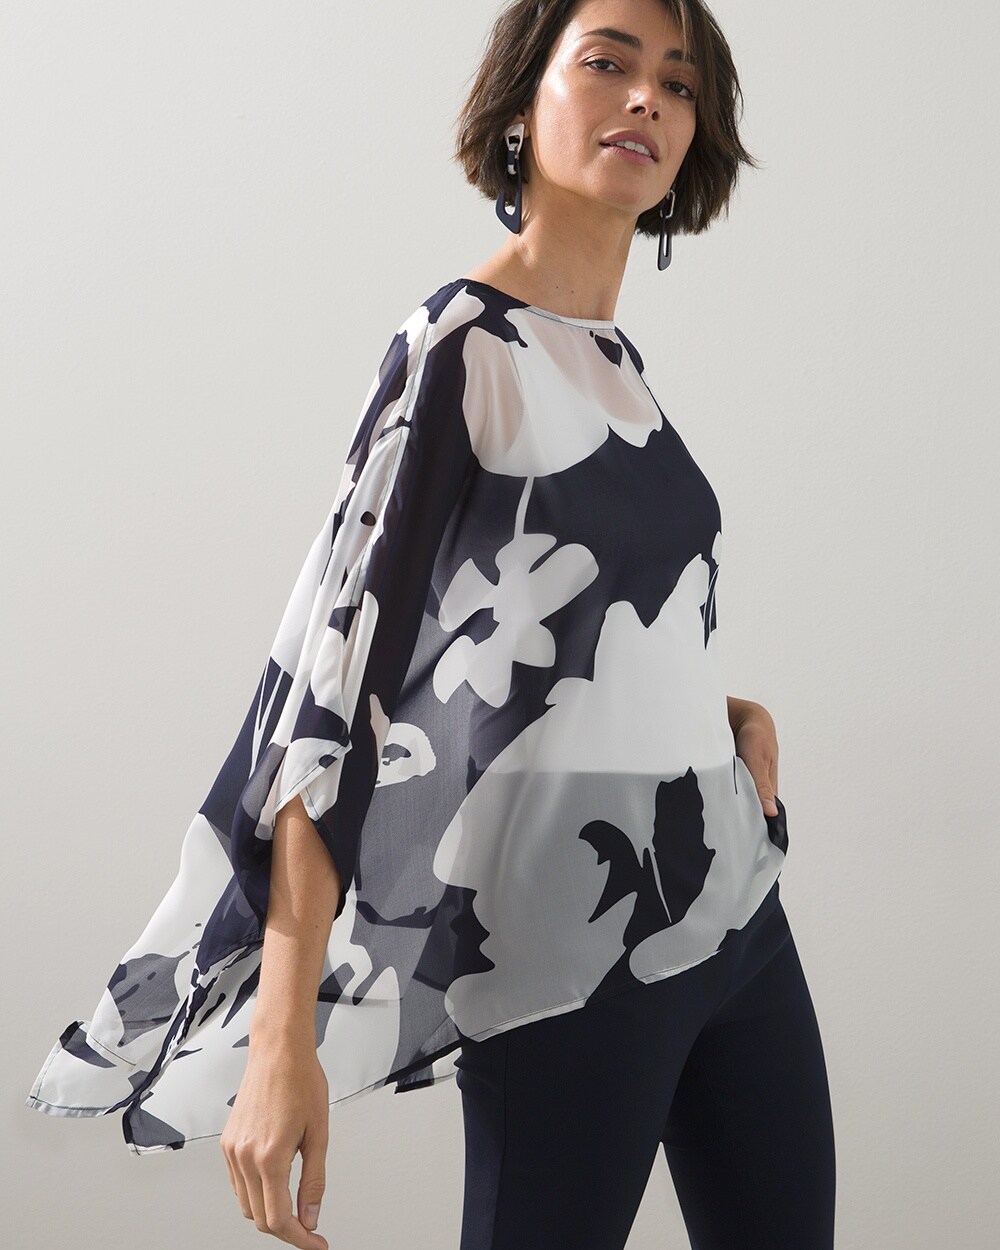 East West Sheer Floral Poncho